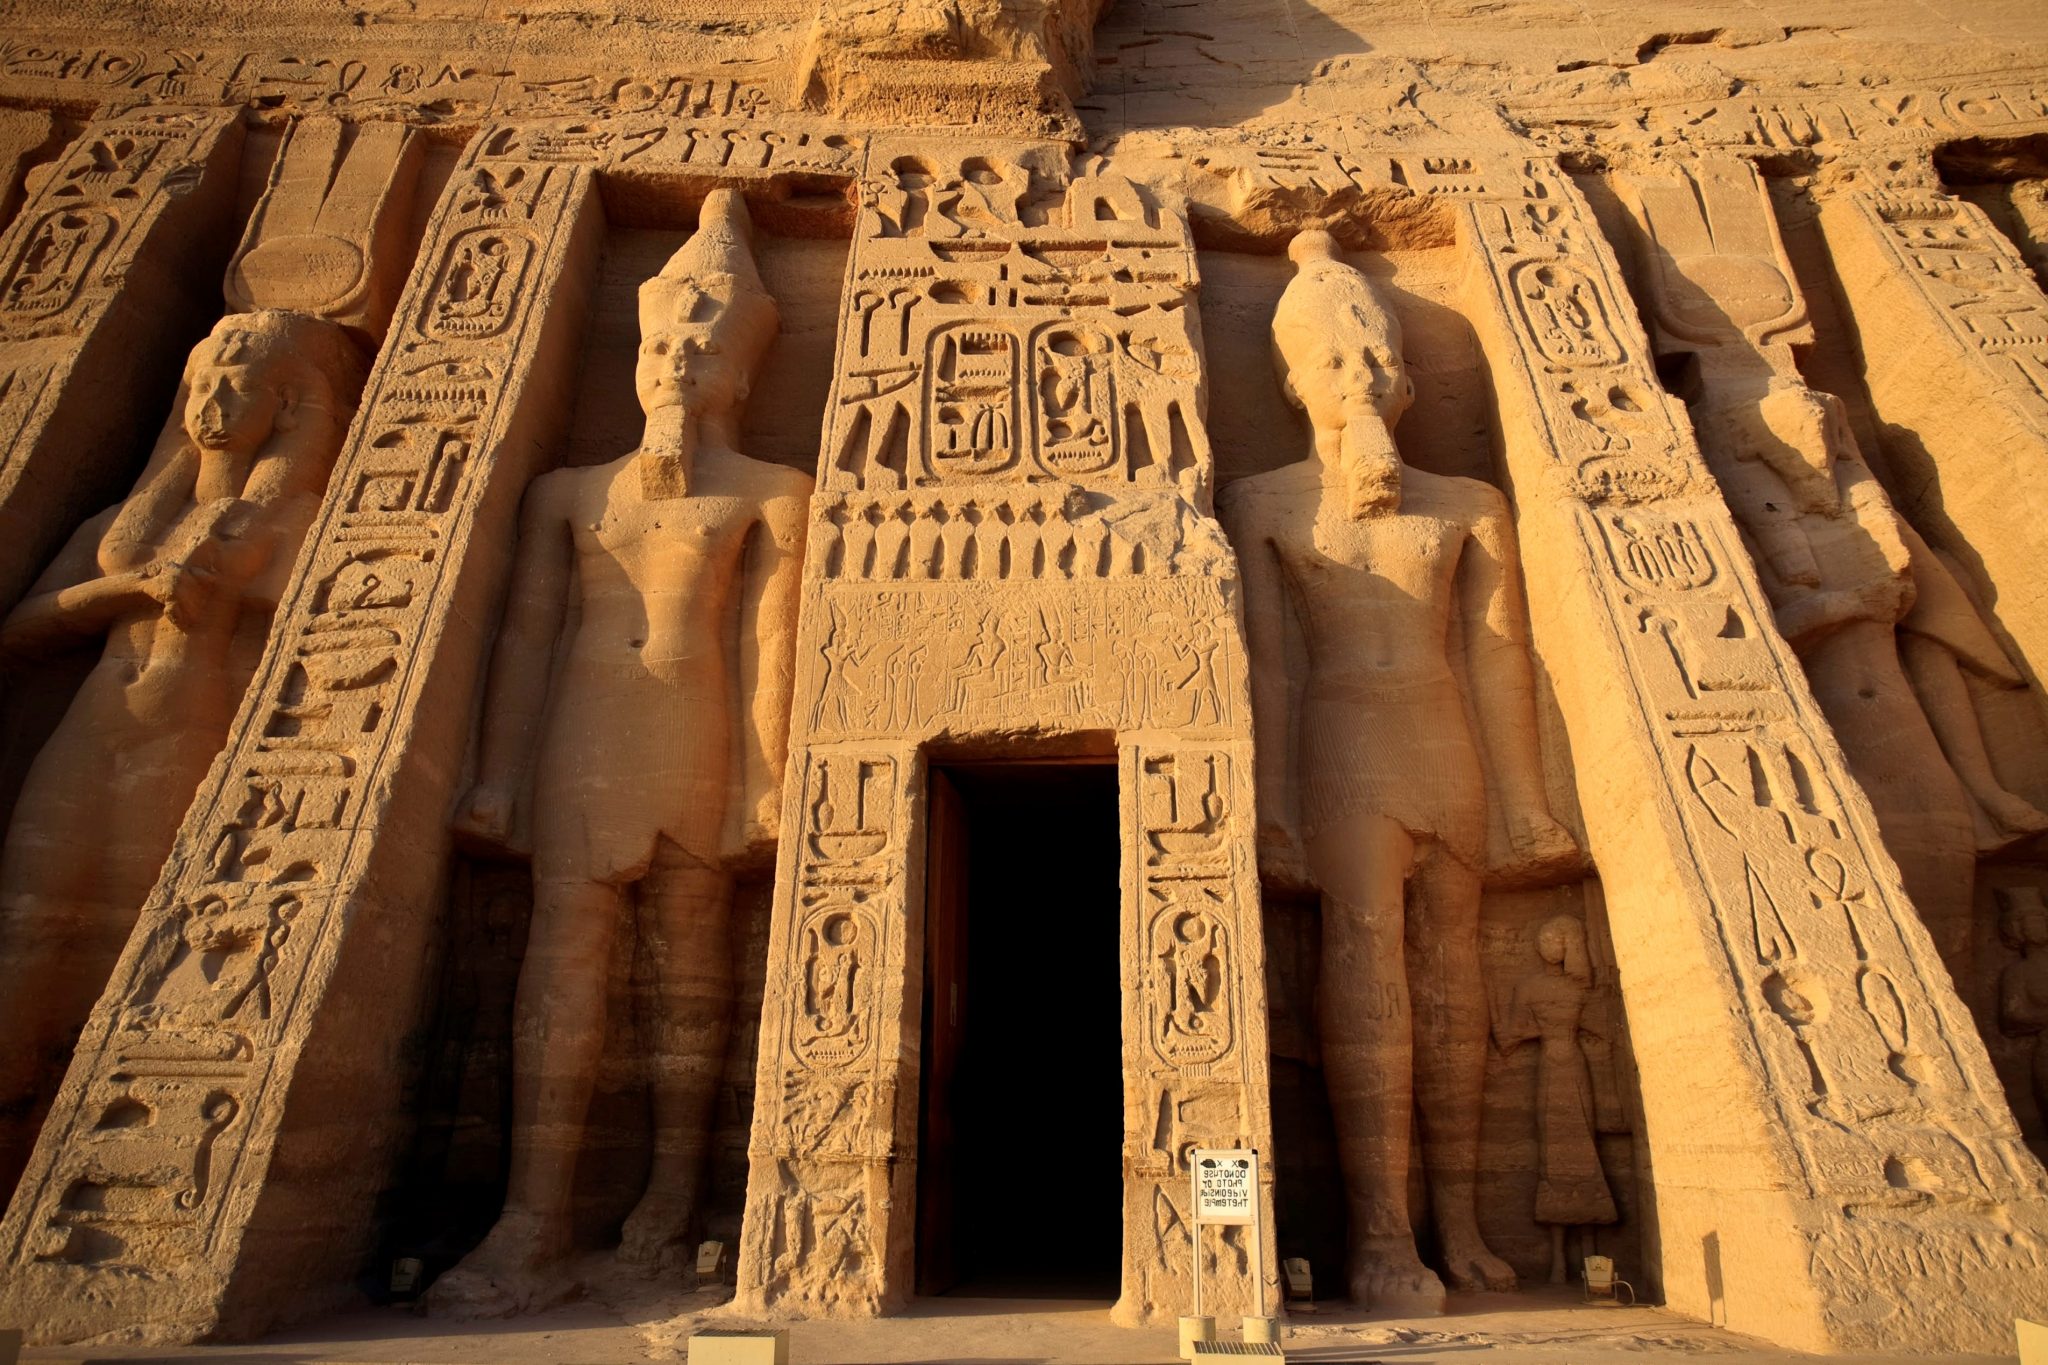 Abu Simbel Temple: Monumental Temples Carved into a Mountainside